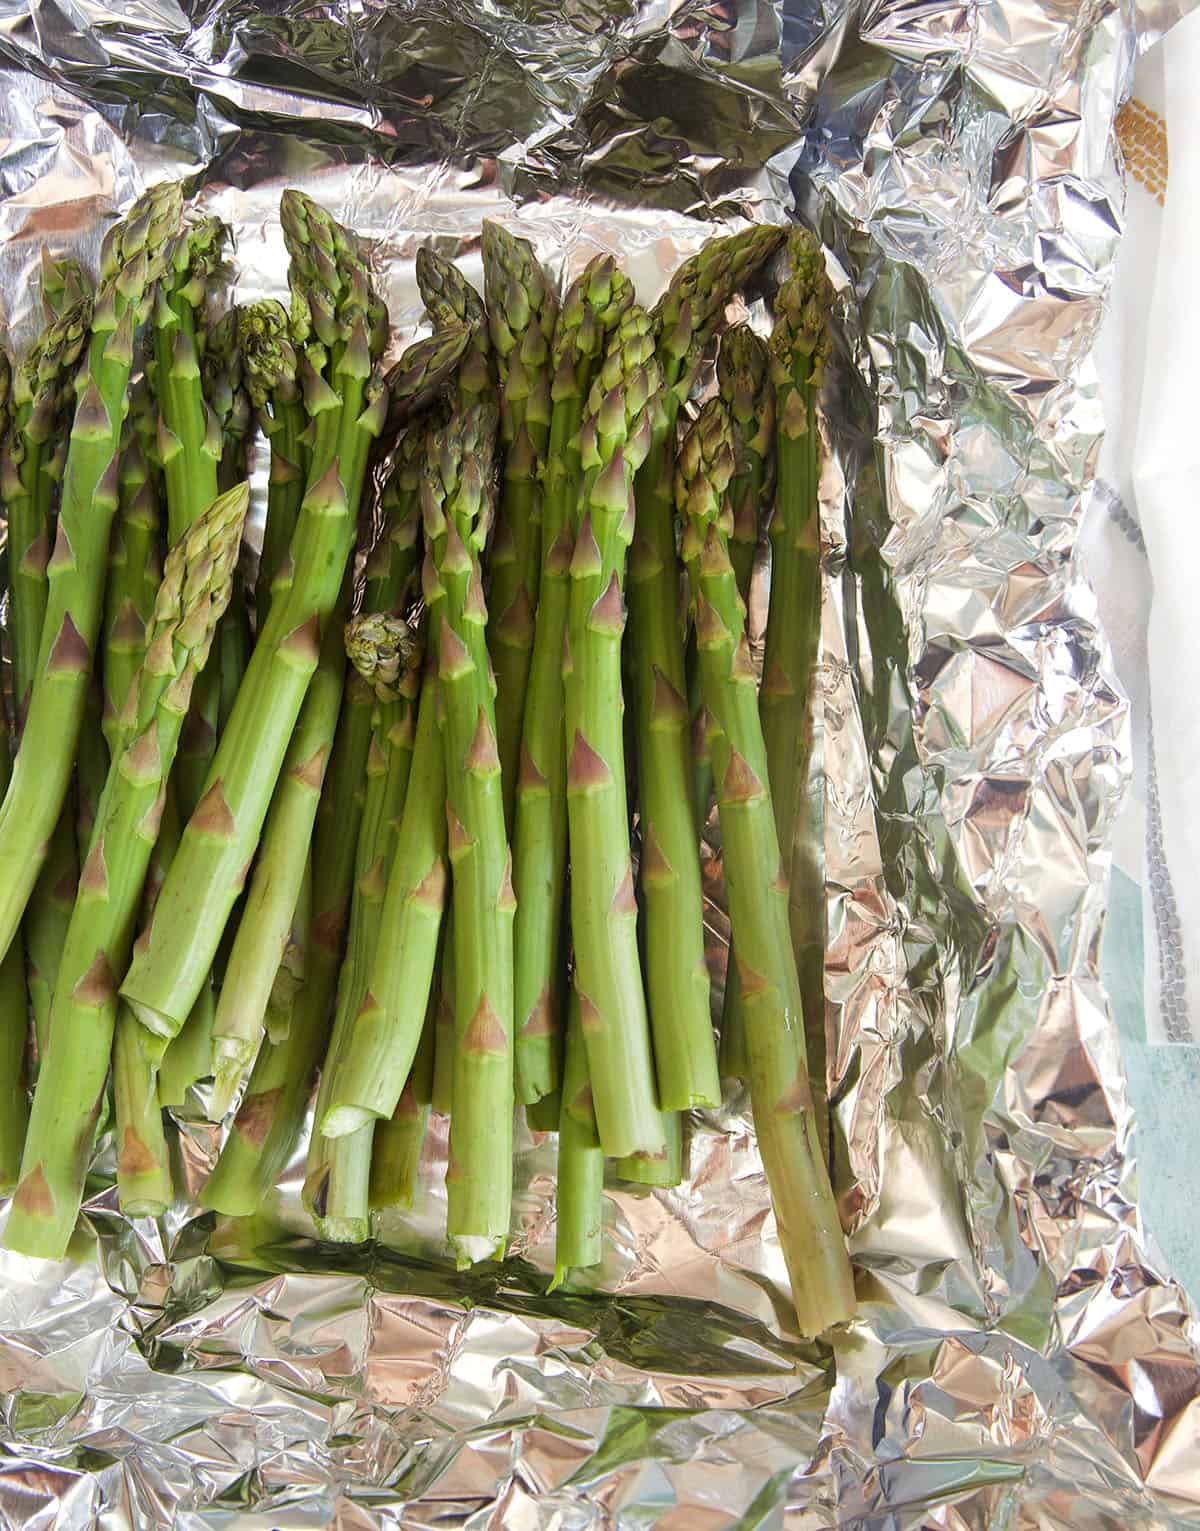 Uncooked asparagus is placed on foil. 